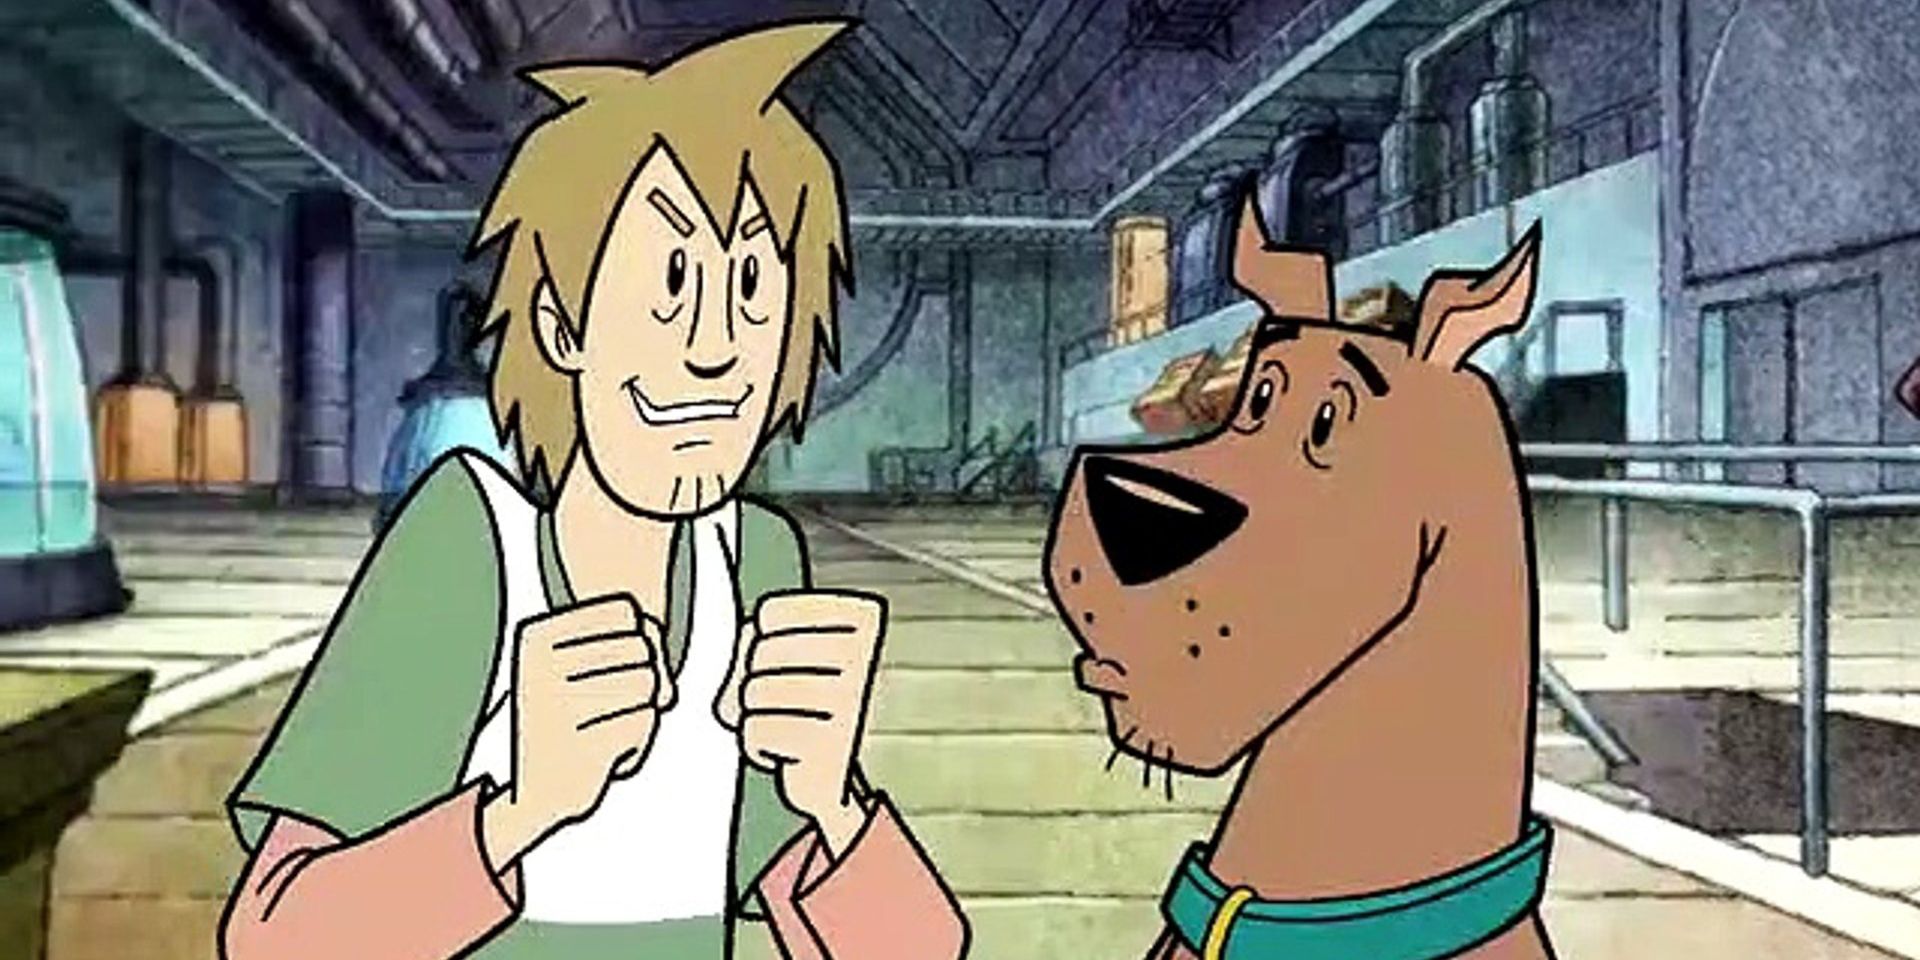 Shaggy And Scooby-Doo talking in Get A Clue, Scooby-Doo?